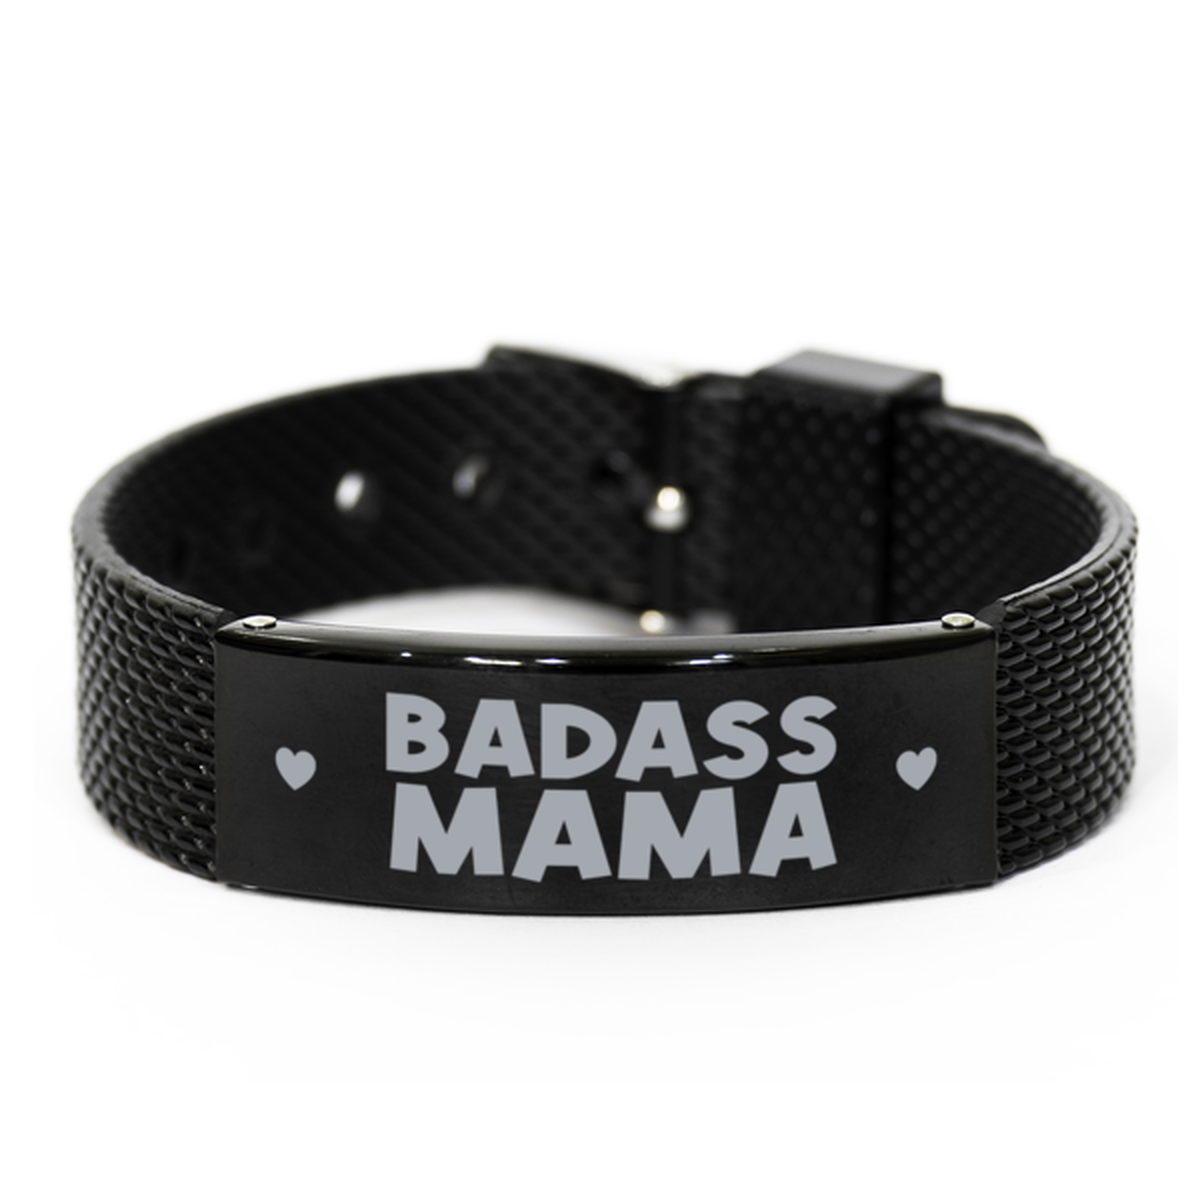 Mama Black Shark Mesh Bracelet, Badass Mama, Funny Family Gifts For Mama From Son Daughter